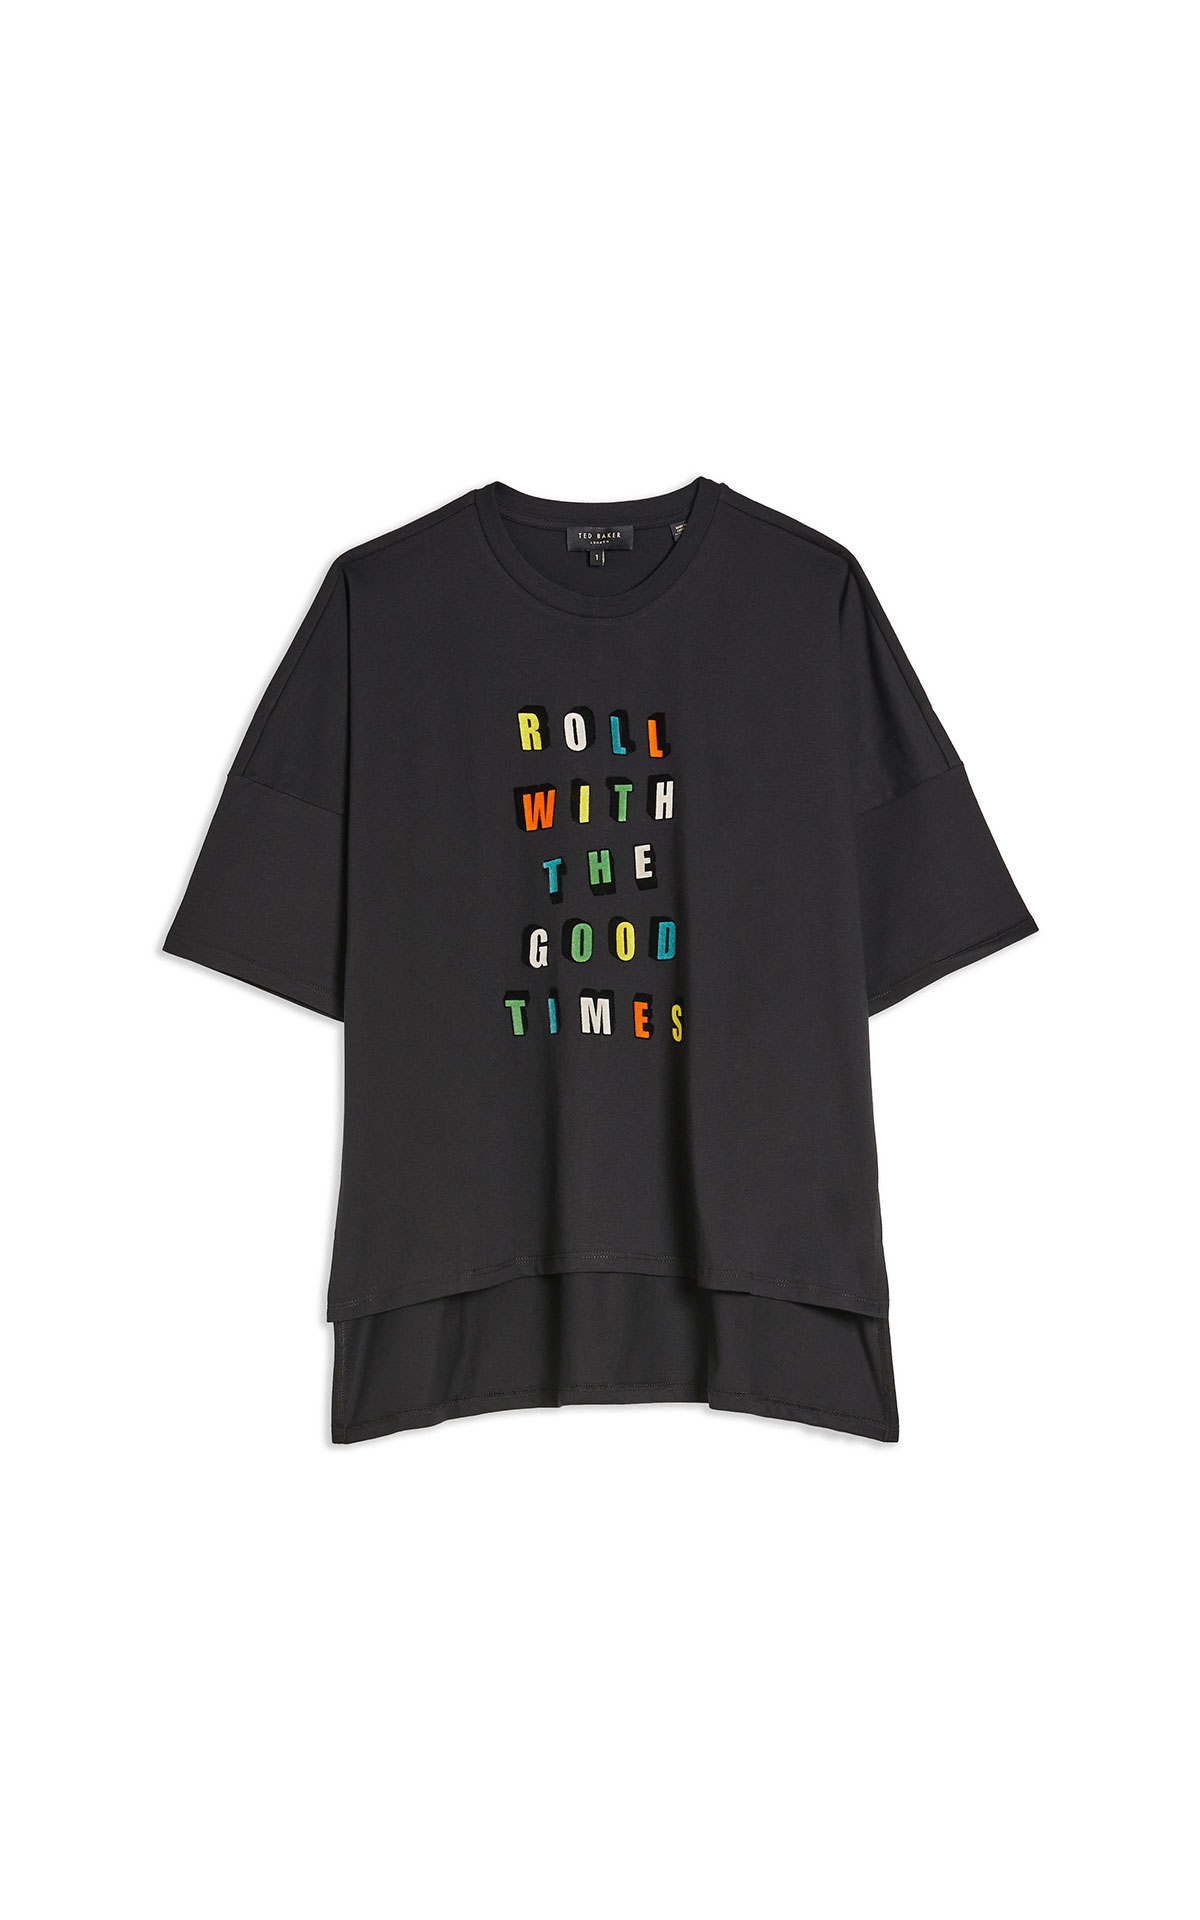 Ted Baker Roll with the good times graphic tee from Bicester Village